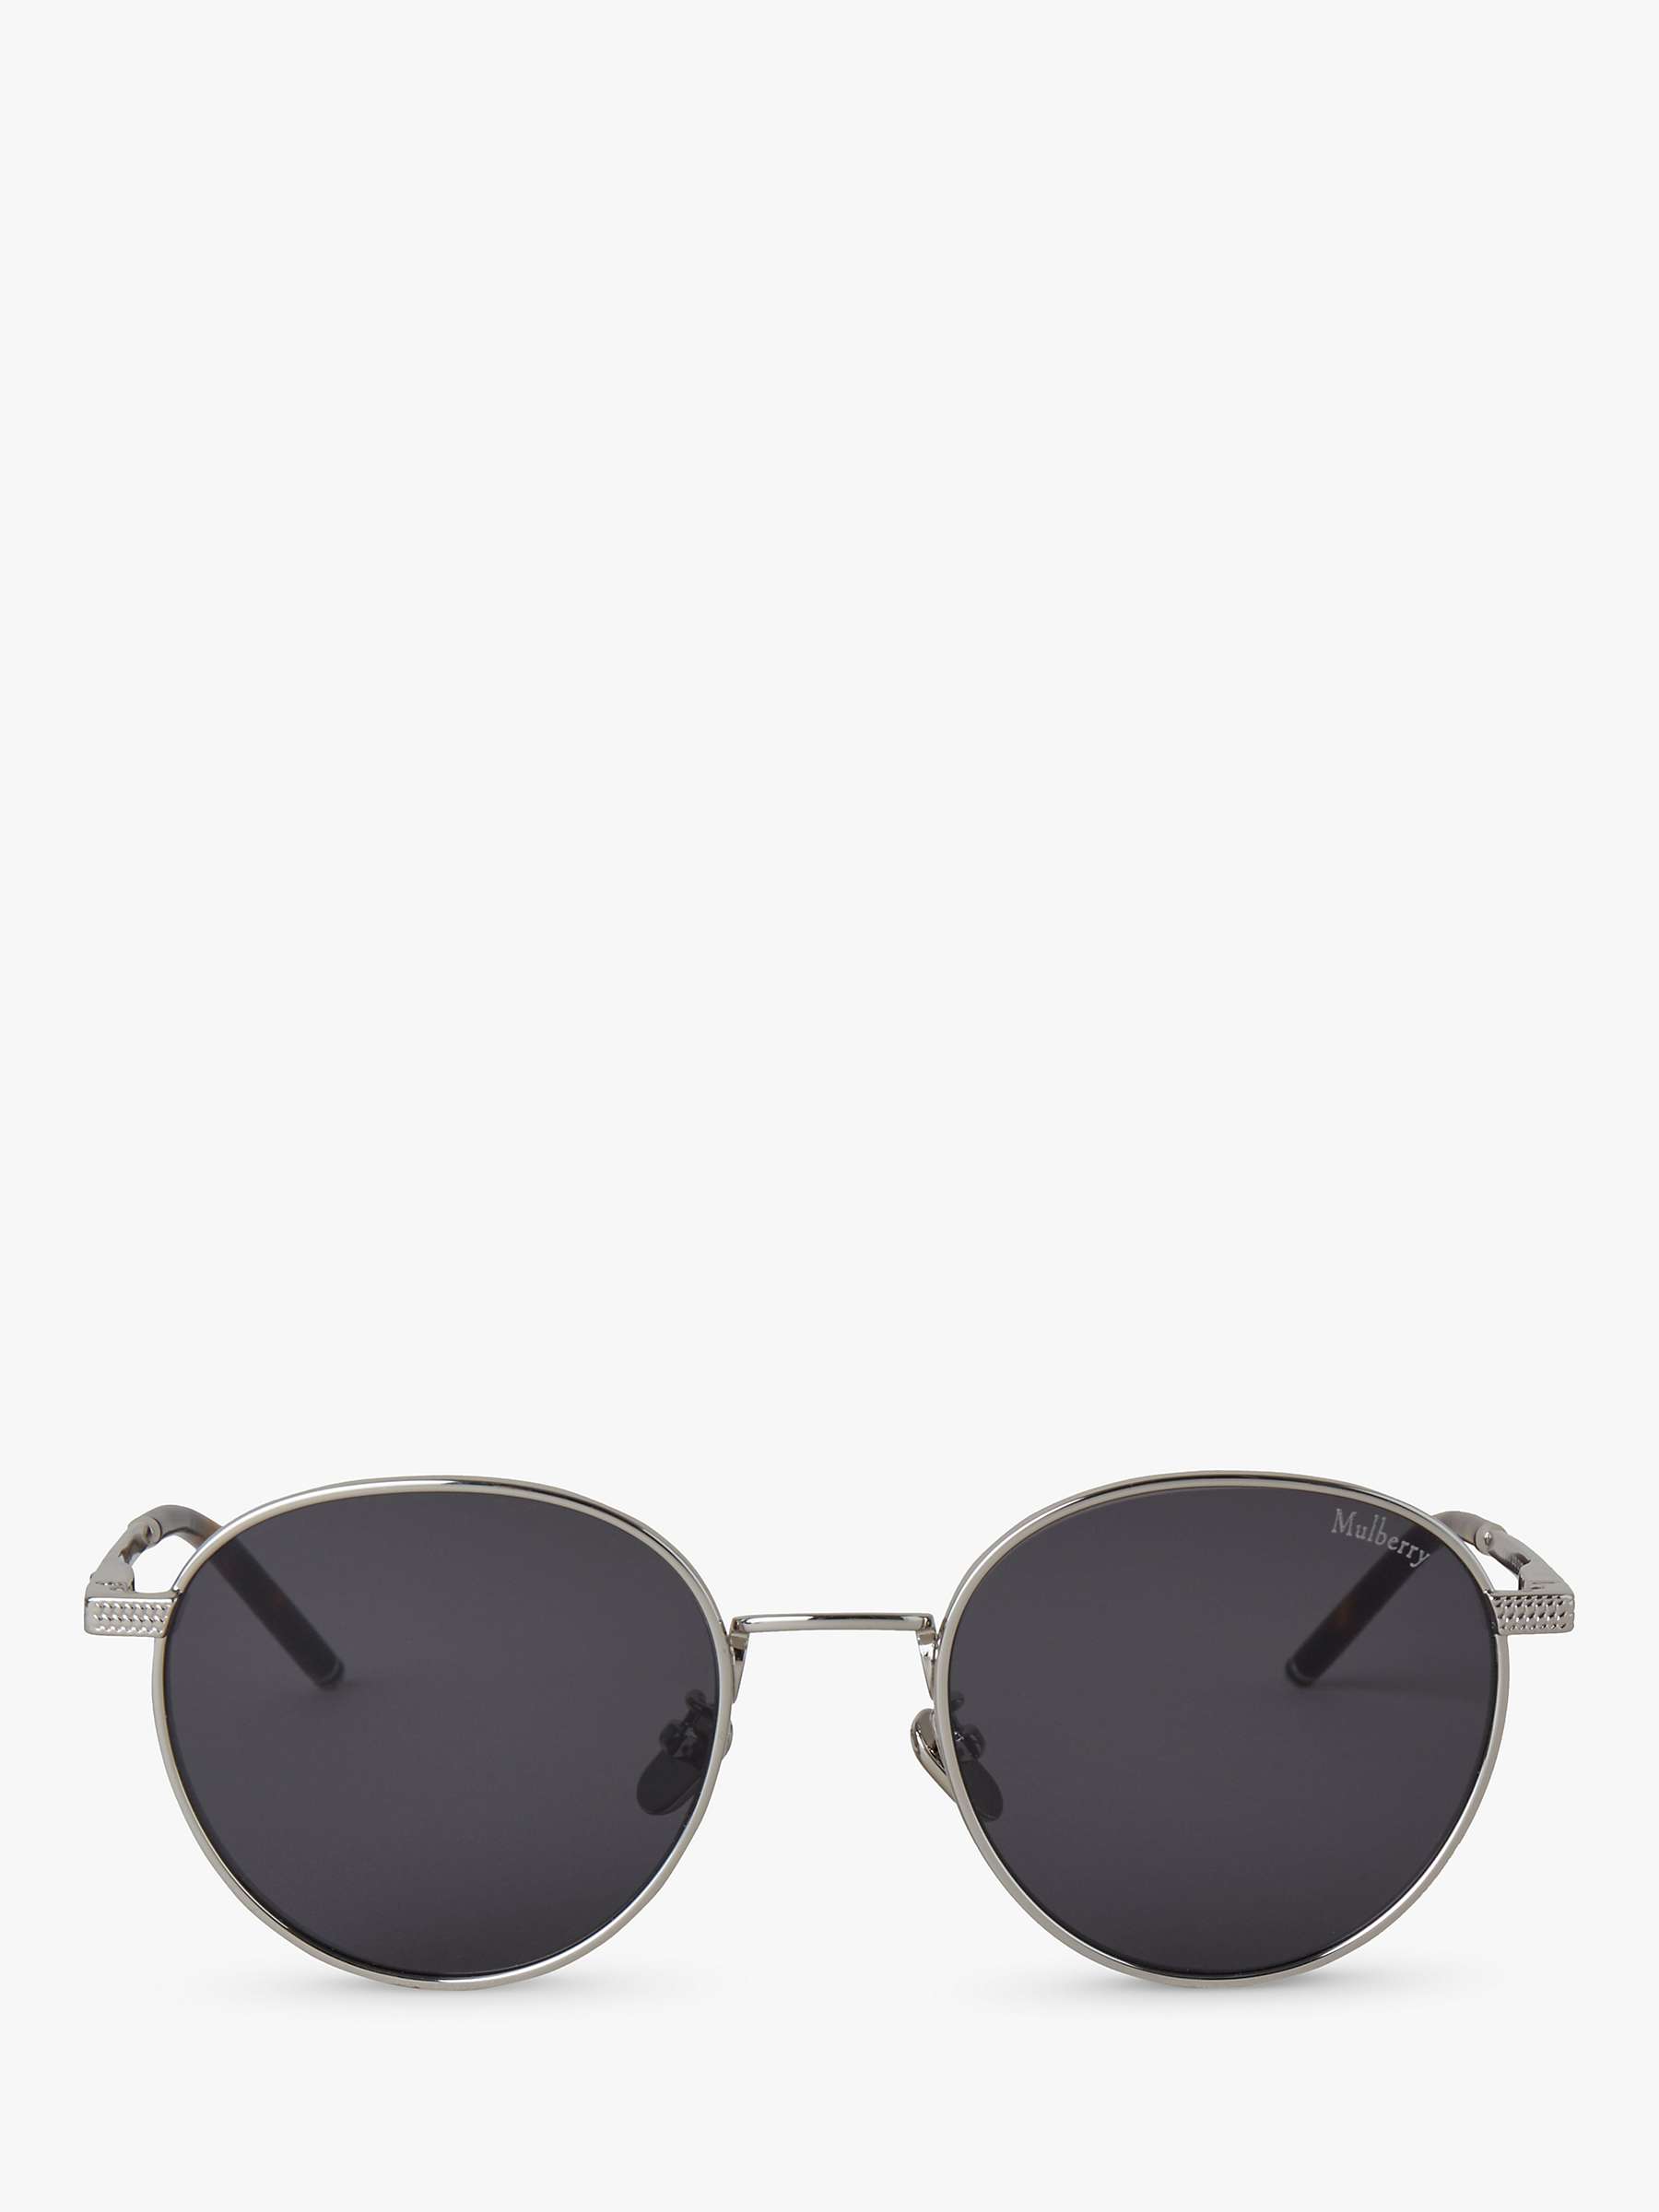 Buy Mulberry Unisex Stevie Oval Sunglasses Online at johnlewis.com